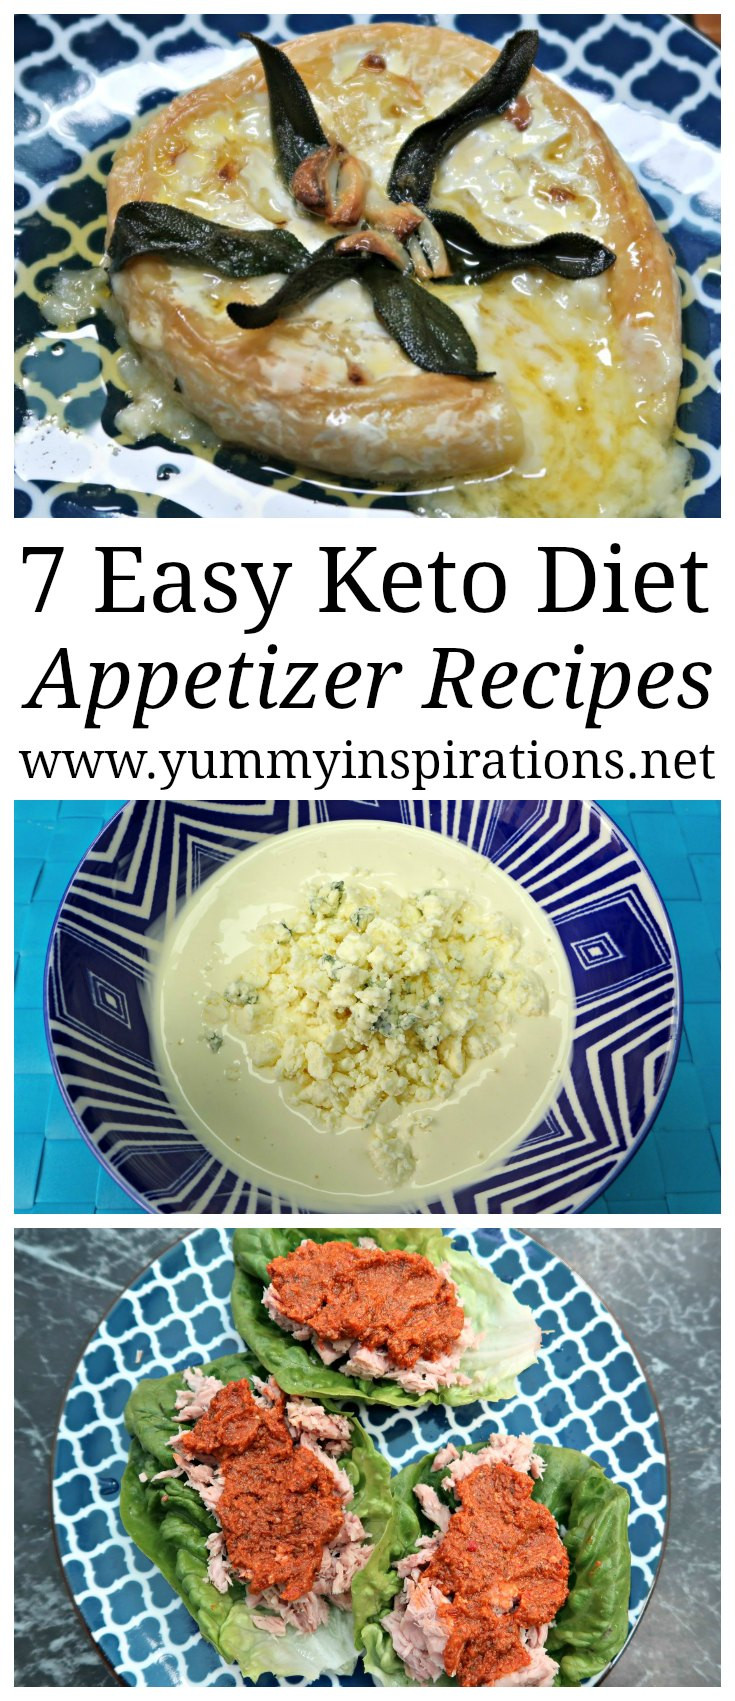 Easy Keto Diet Recipes
 7 Easy Keto Appetizers Recipes Simple Low Carb Appetizer